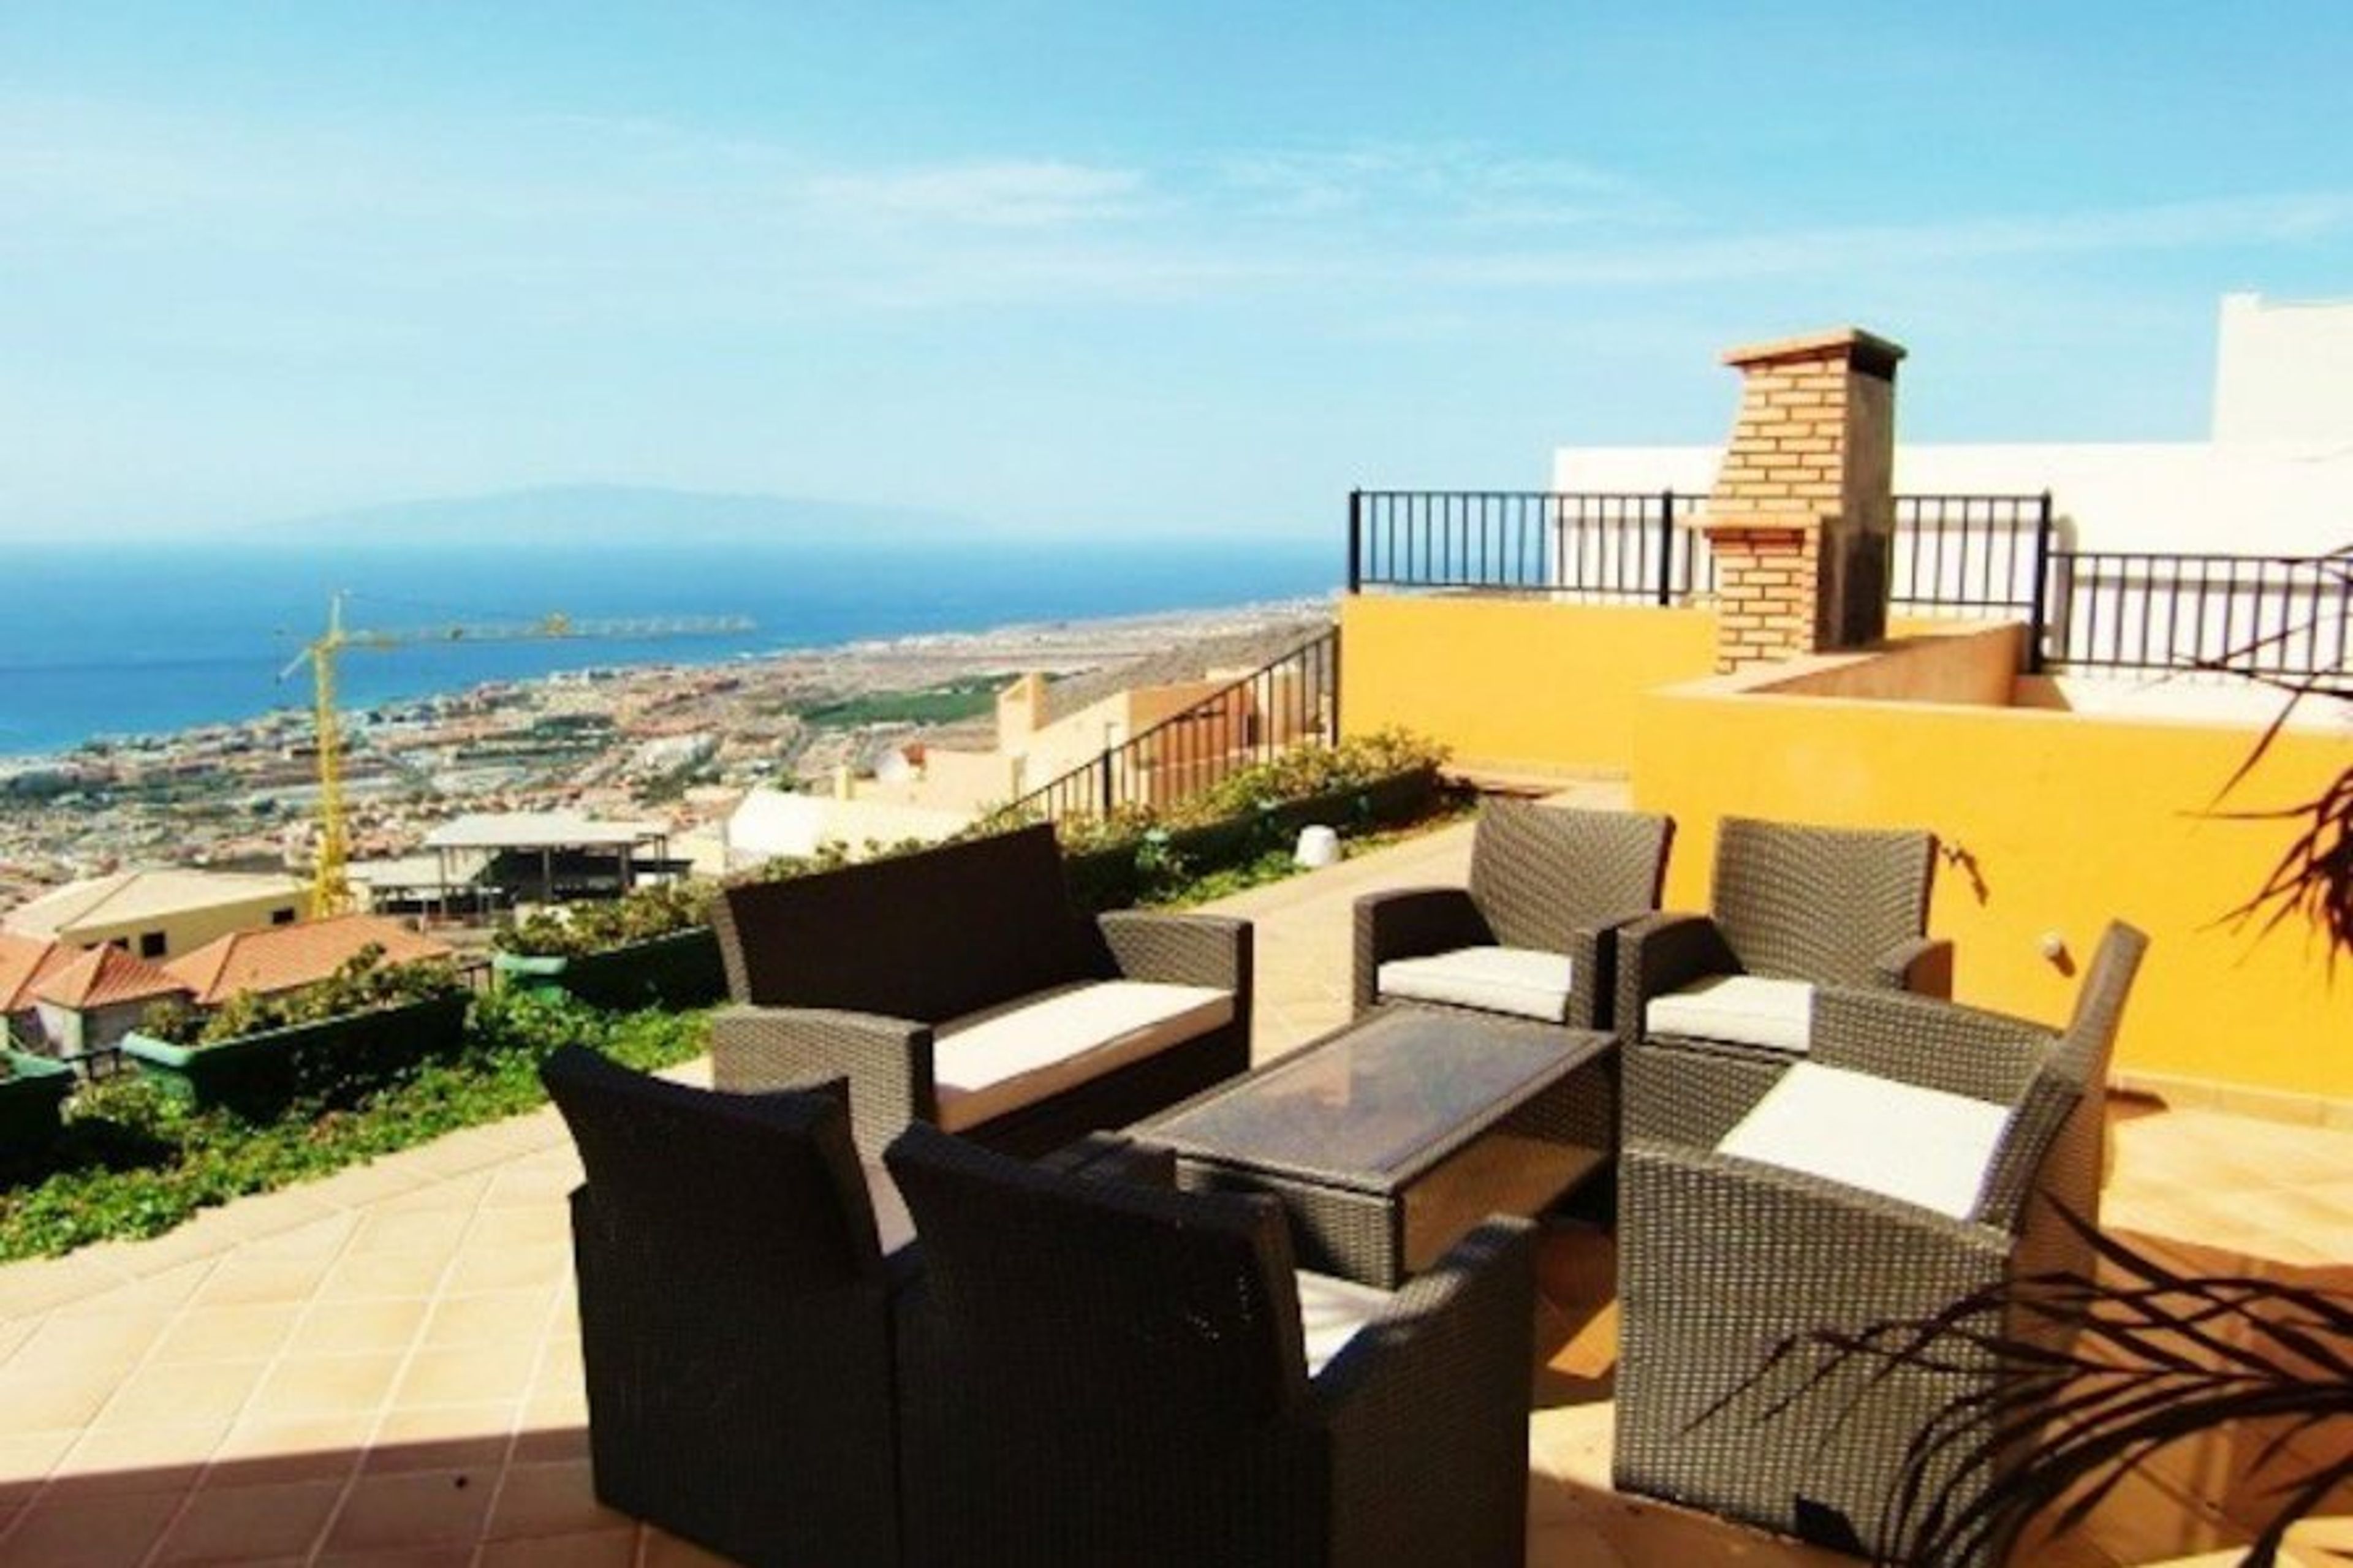 Lounge seating overlooking the coast